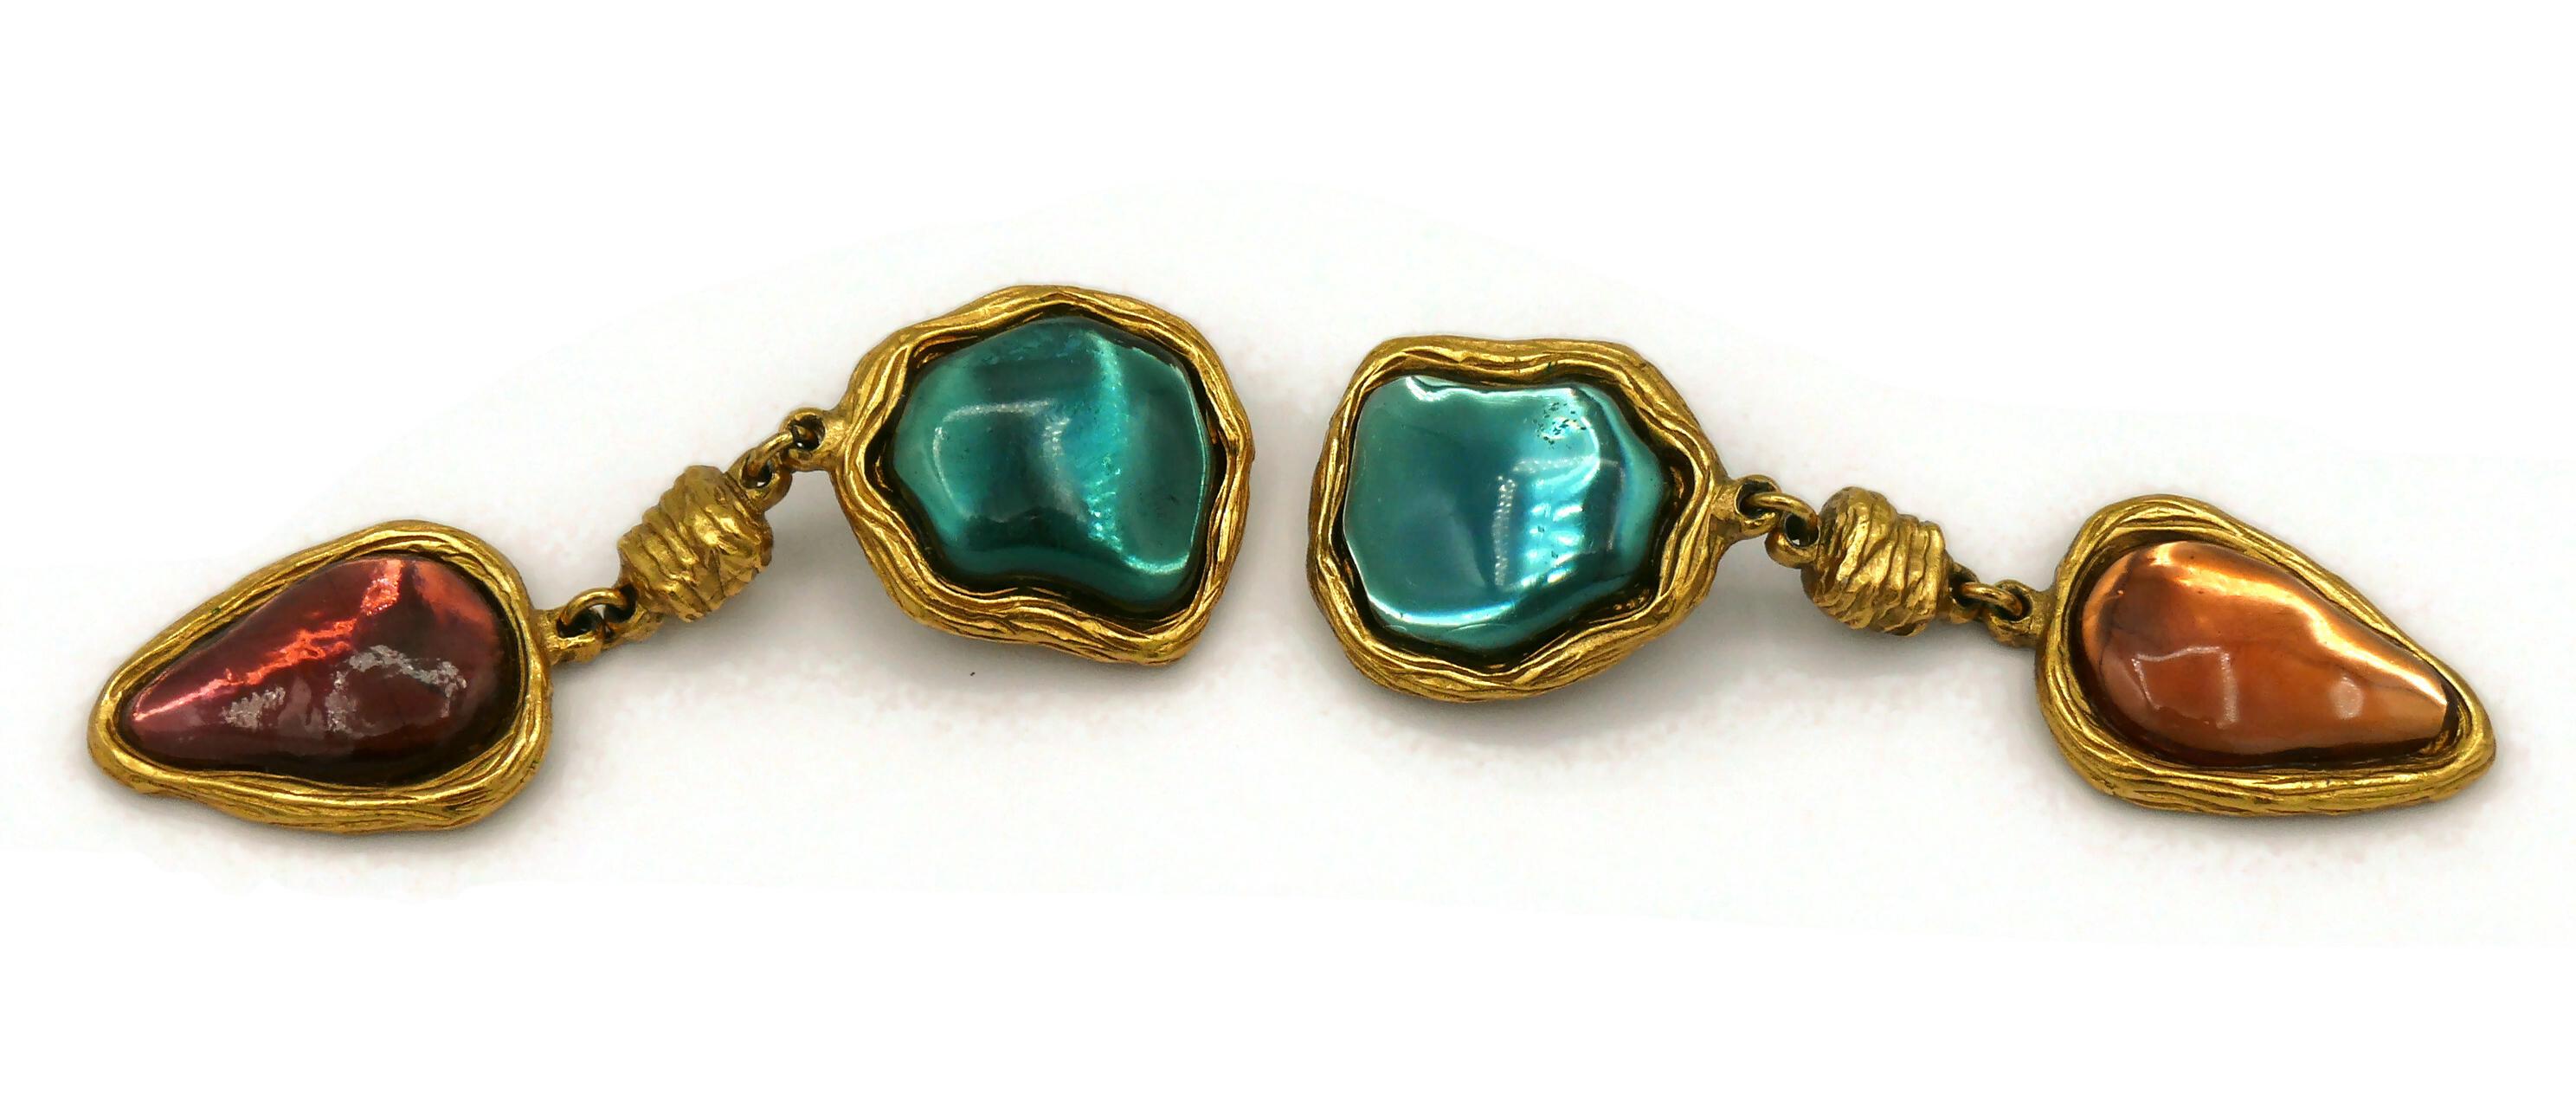 CHARLES JOURDAN Vintage Gold Tone Resin Cabochons Dangling Earrings In Good Condition For Sale In Nice, FR